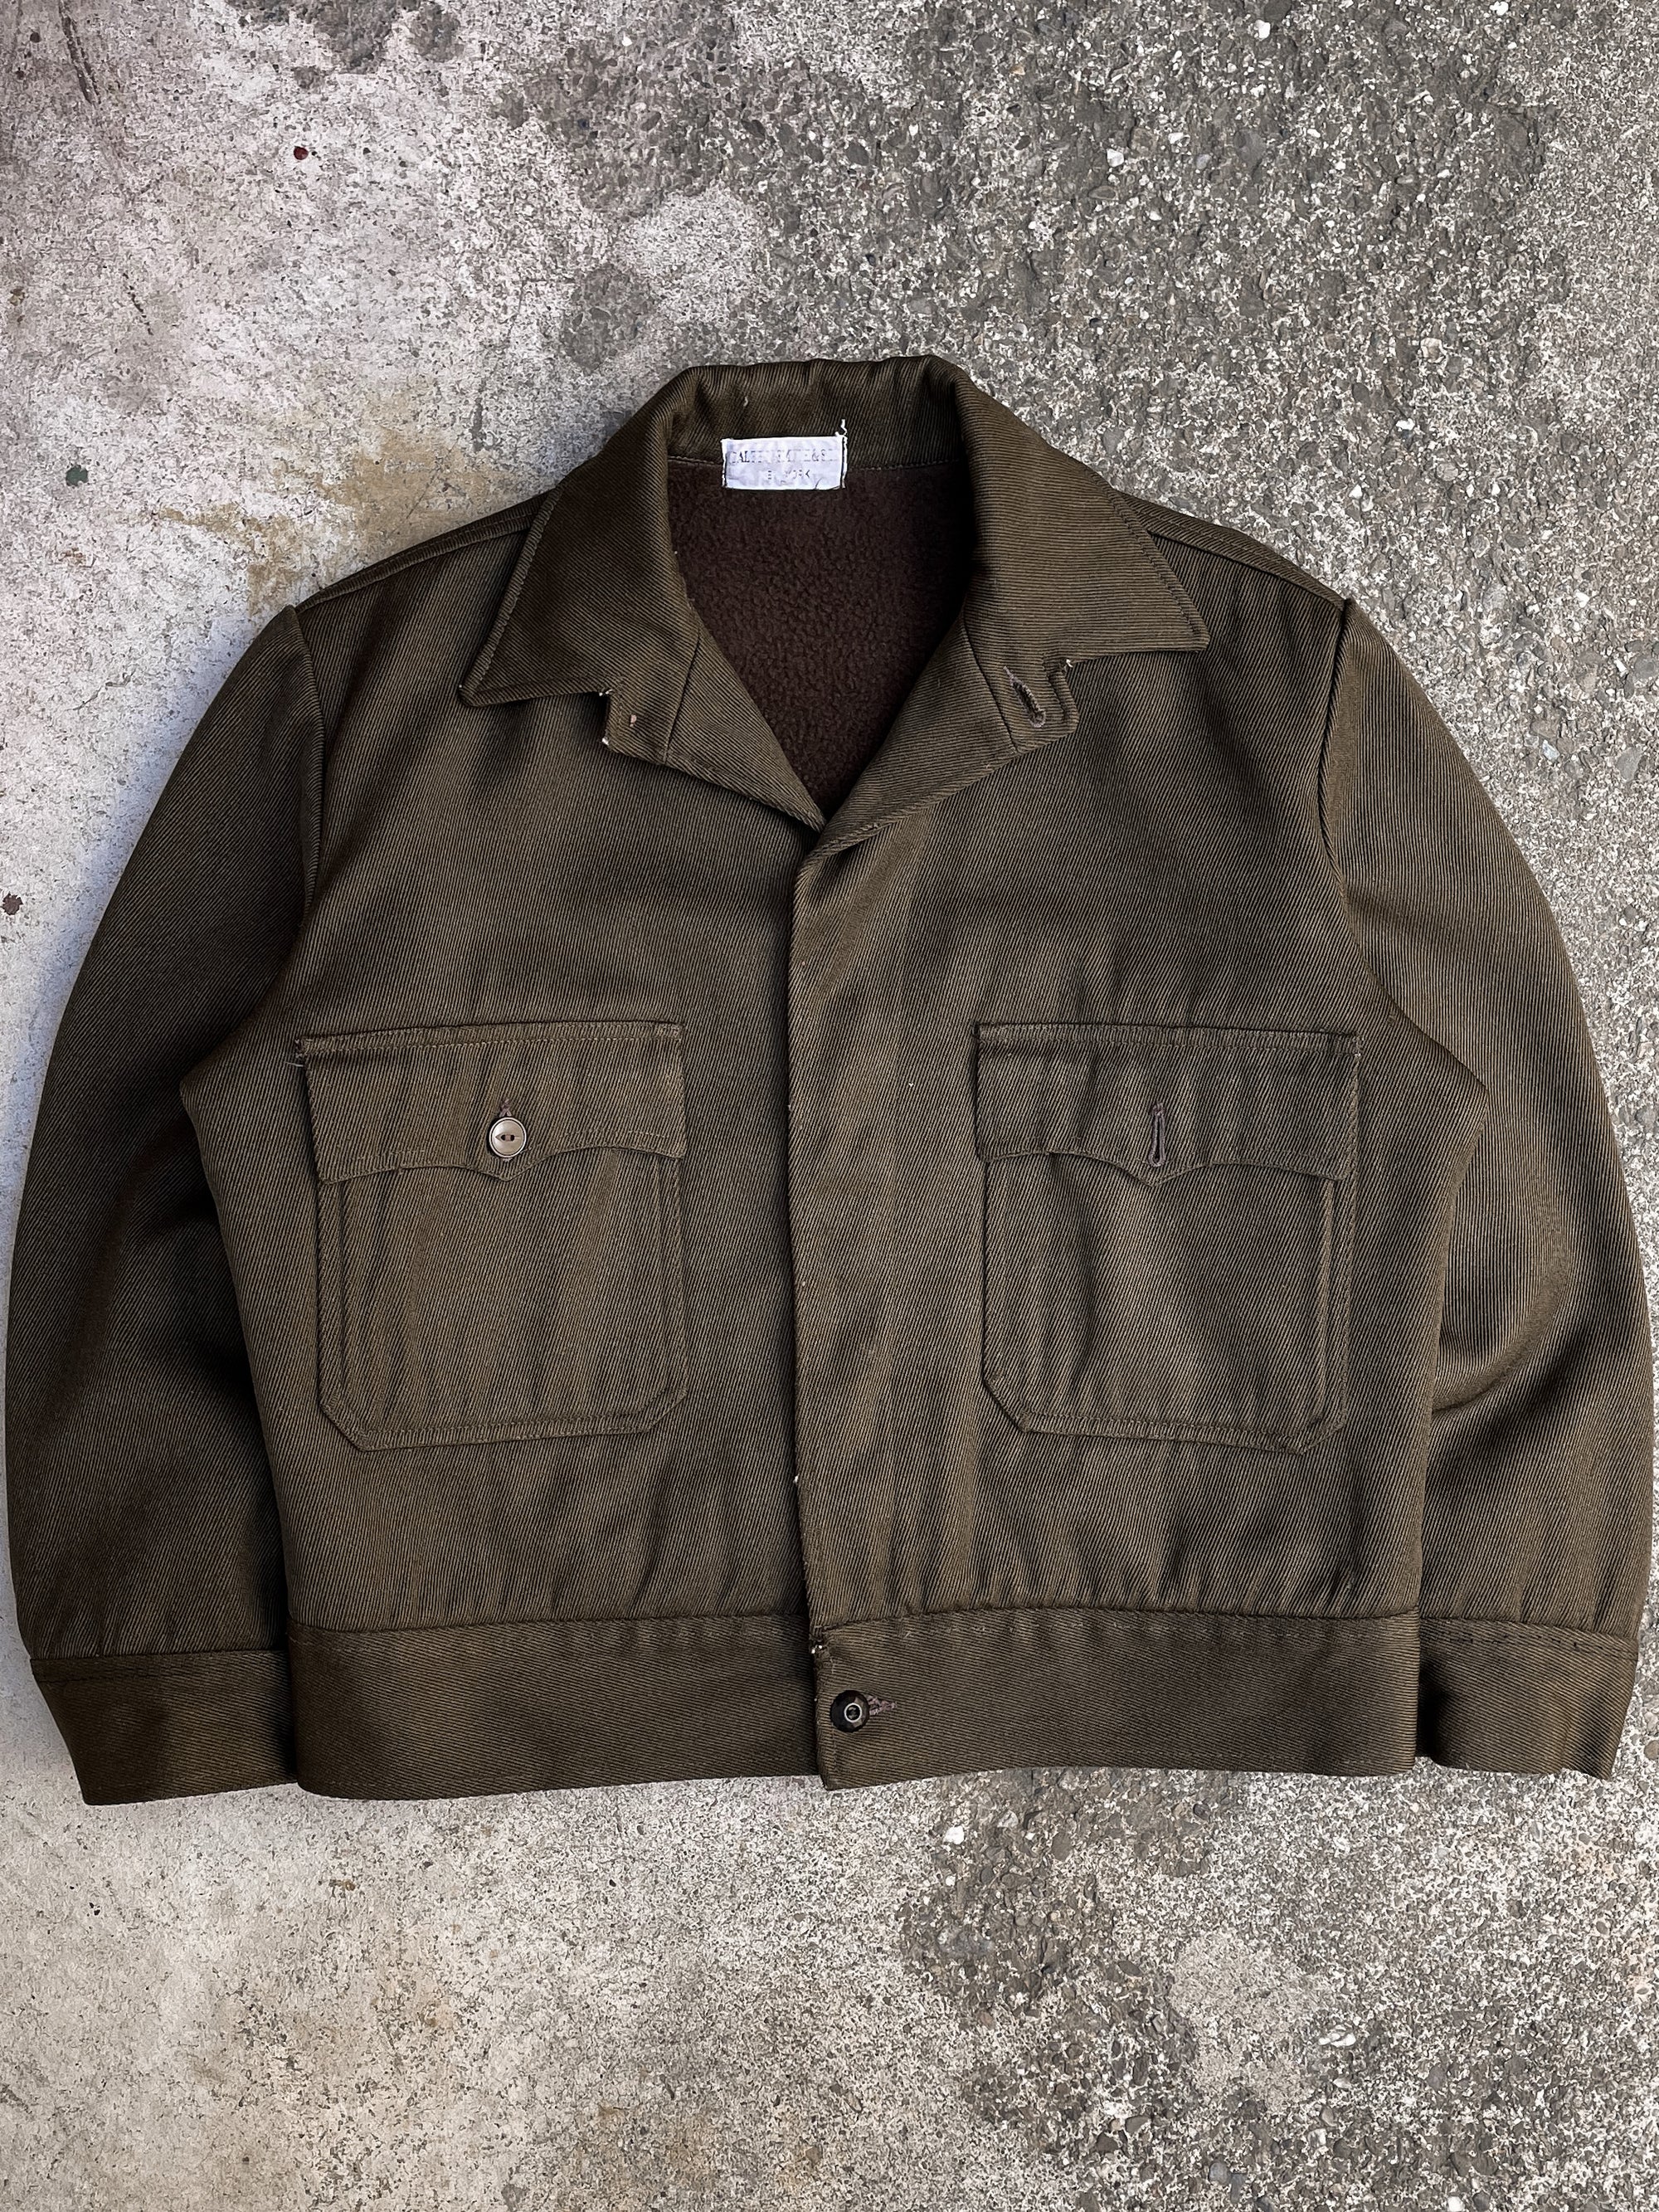 1950s/60s Olive Brown Wool Lined Work Jacket